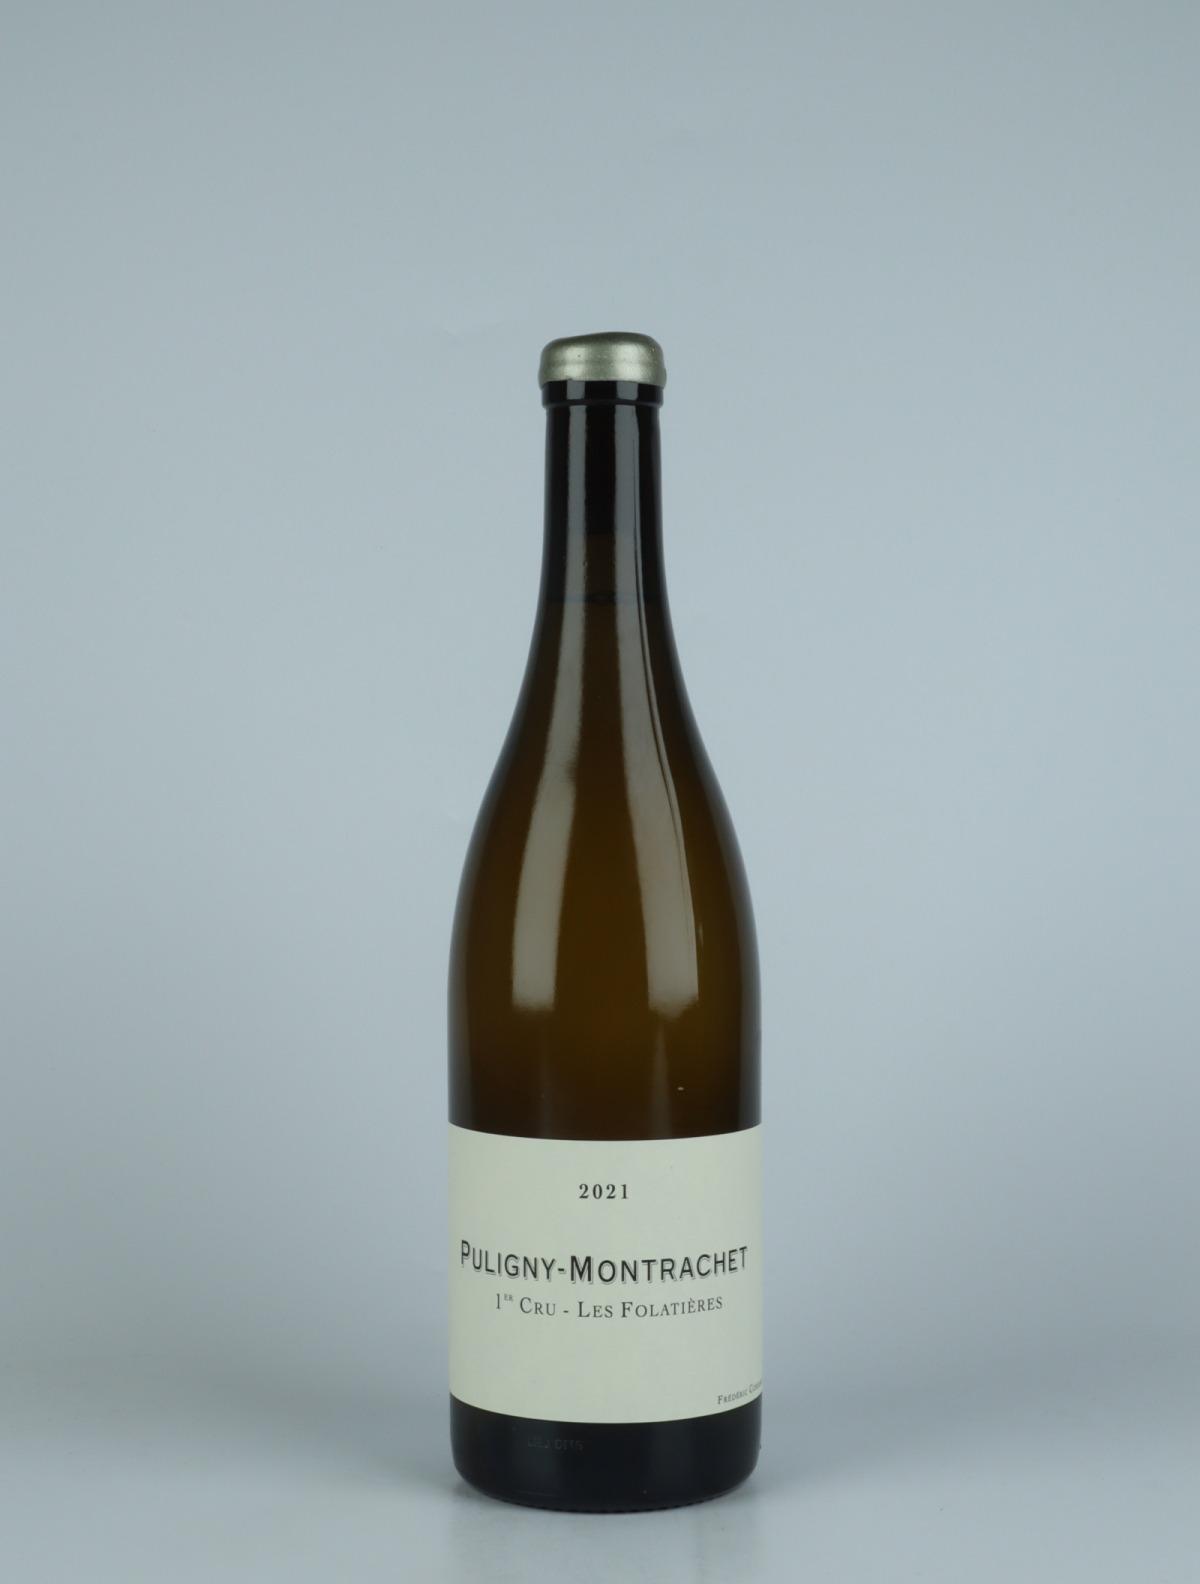 A bottle 2021 Puligny Montrachet 1. Cru - Folatières White wine from Frédéric Cossard, Burgundy in France